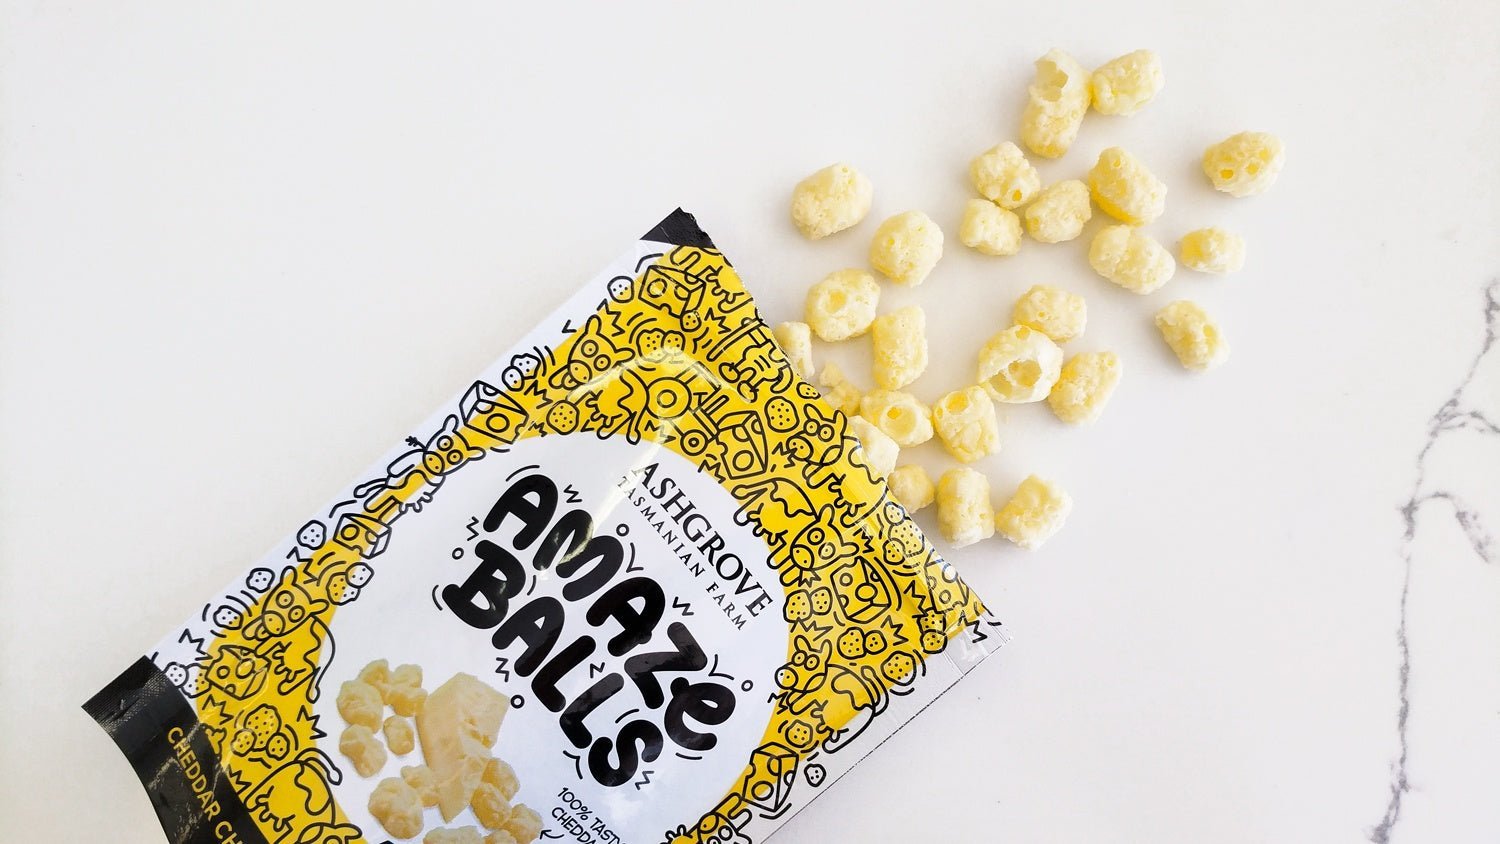 AMAZEBALLS Crunchy Cheese Balls by Ashgrove // Product Review - PBCo.